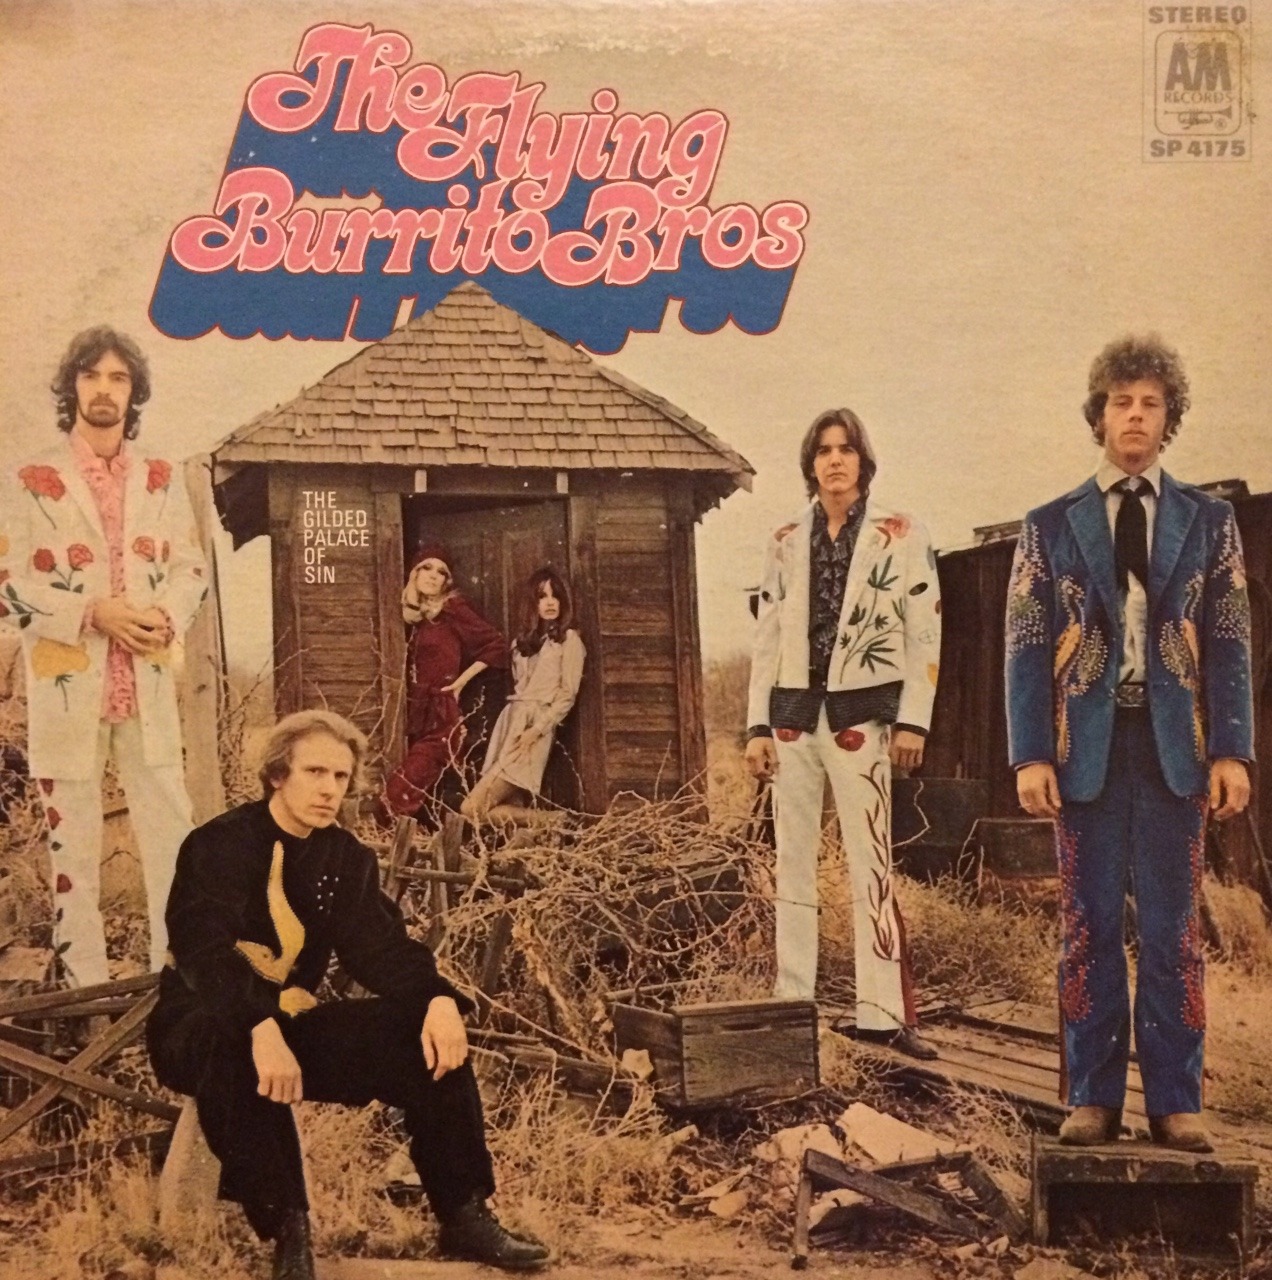 The Gilded Palace of Sin, by The Flying Burrito Brothers (A &amp; M, 1969). From